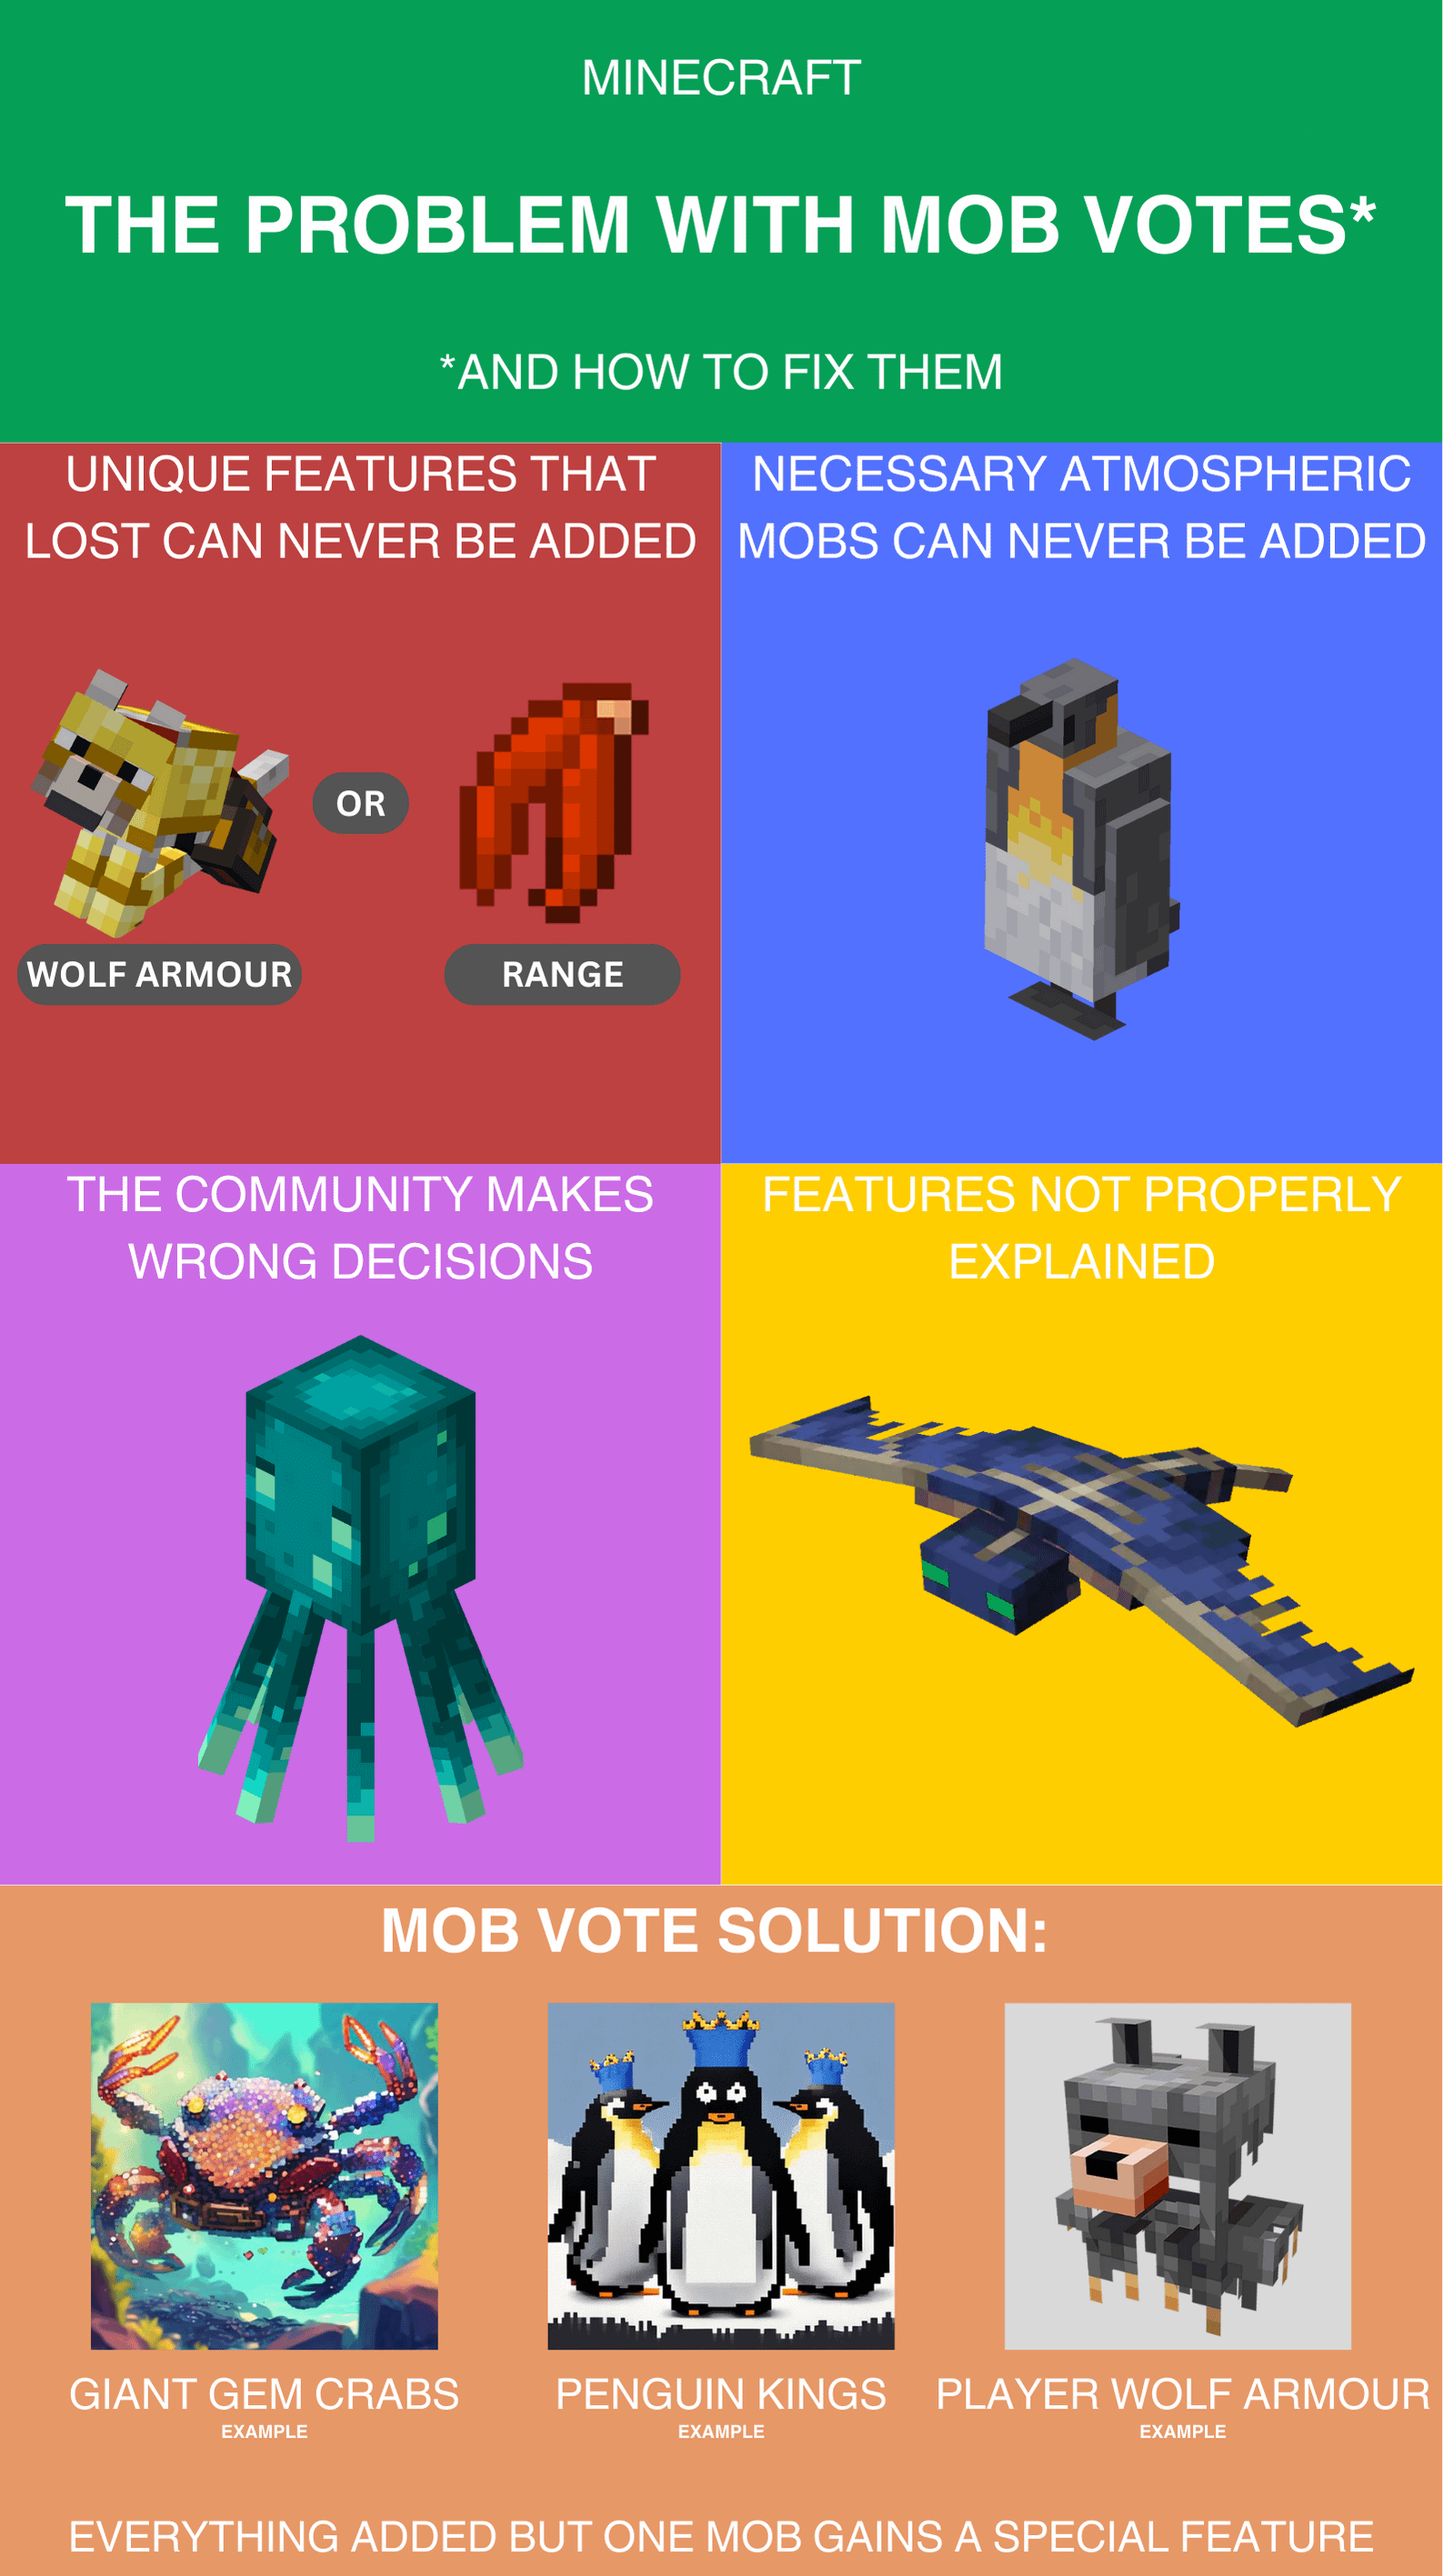 Minecraft Memes - The problem with mob votes (and a possible solution)